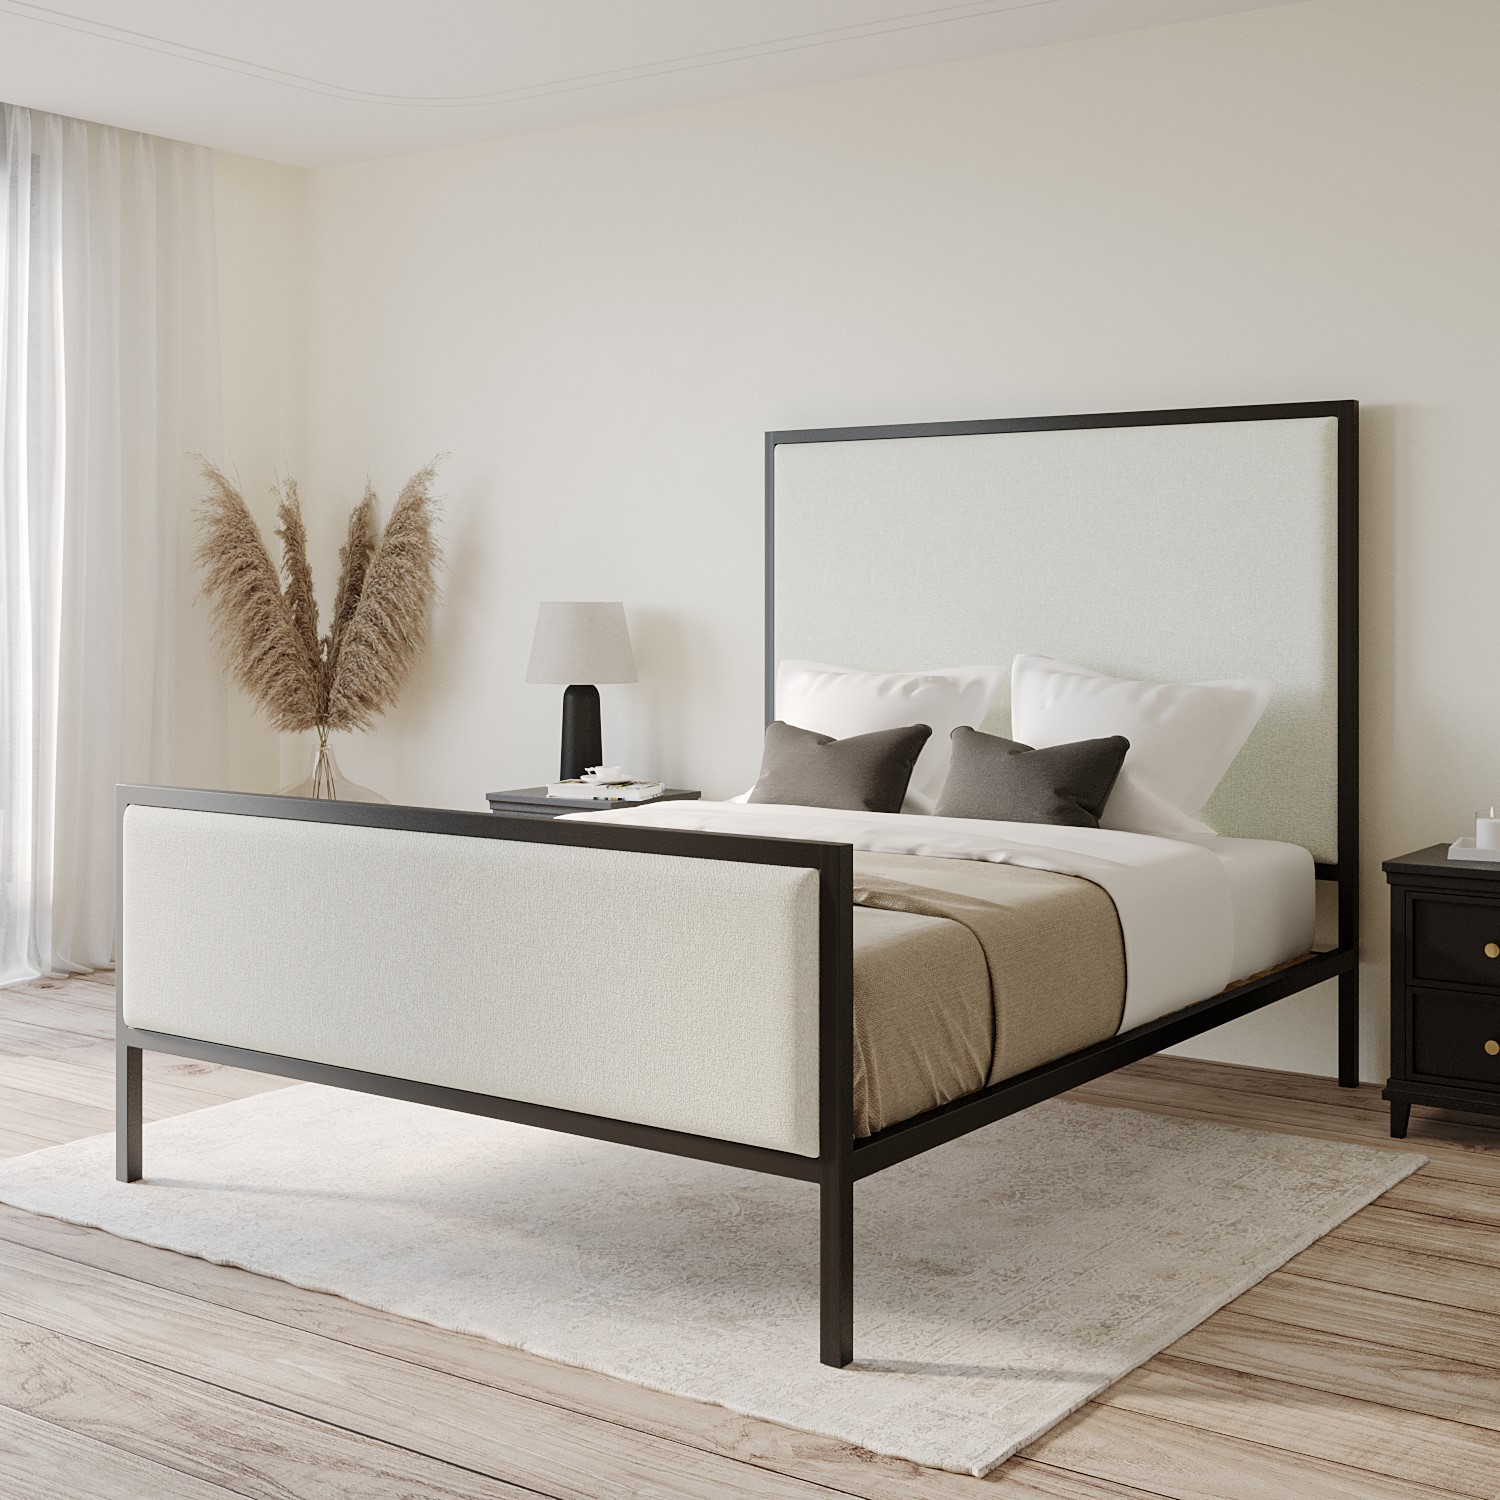 Photo of Beige upholstered king size bed with black metal frame - alexandra